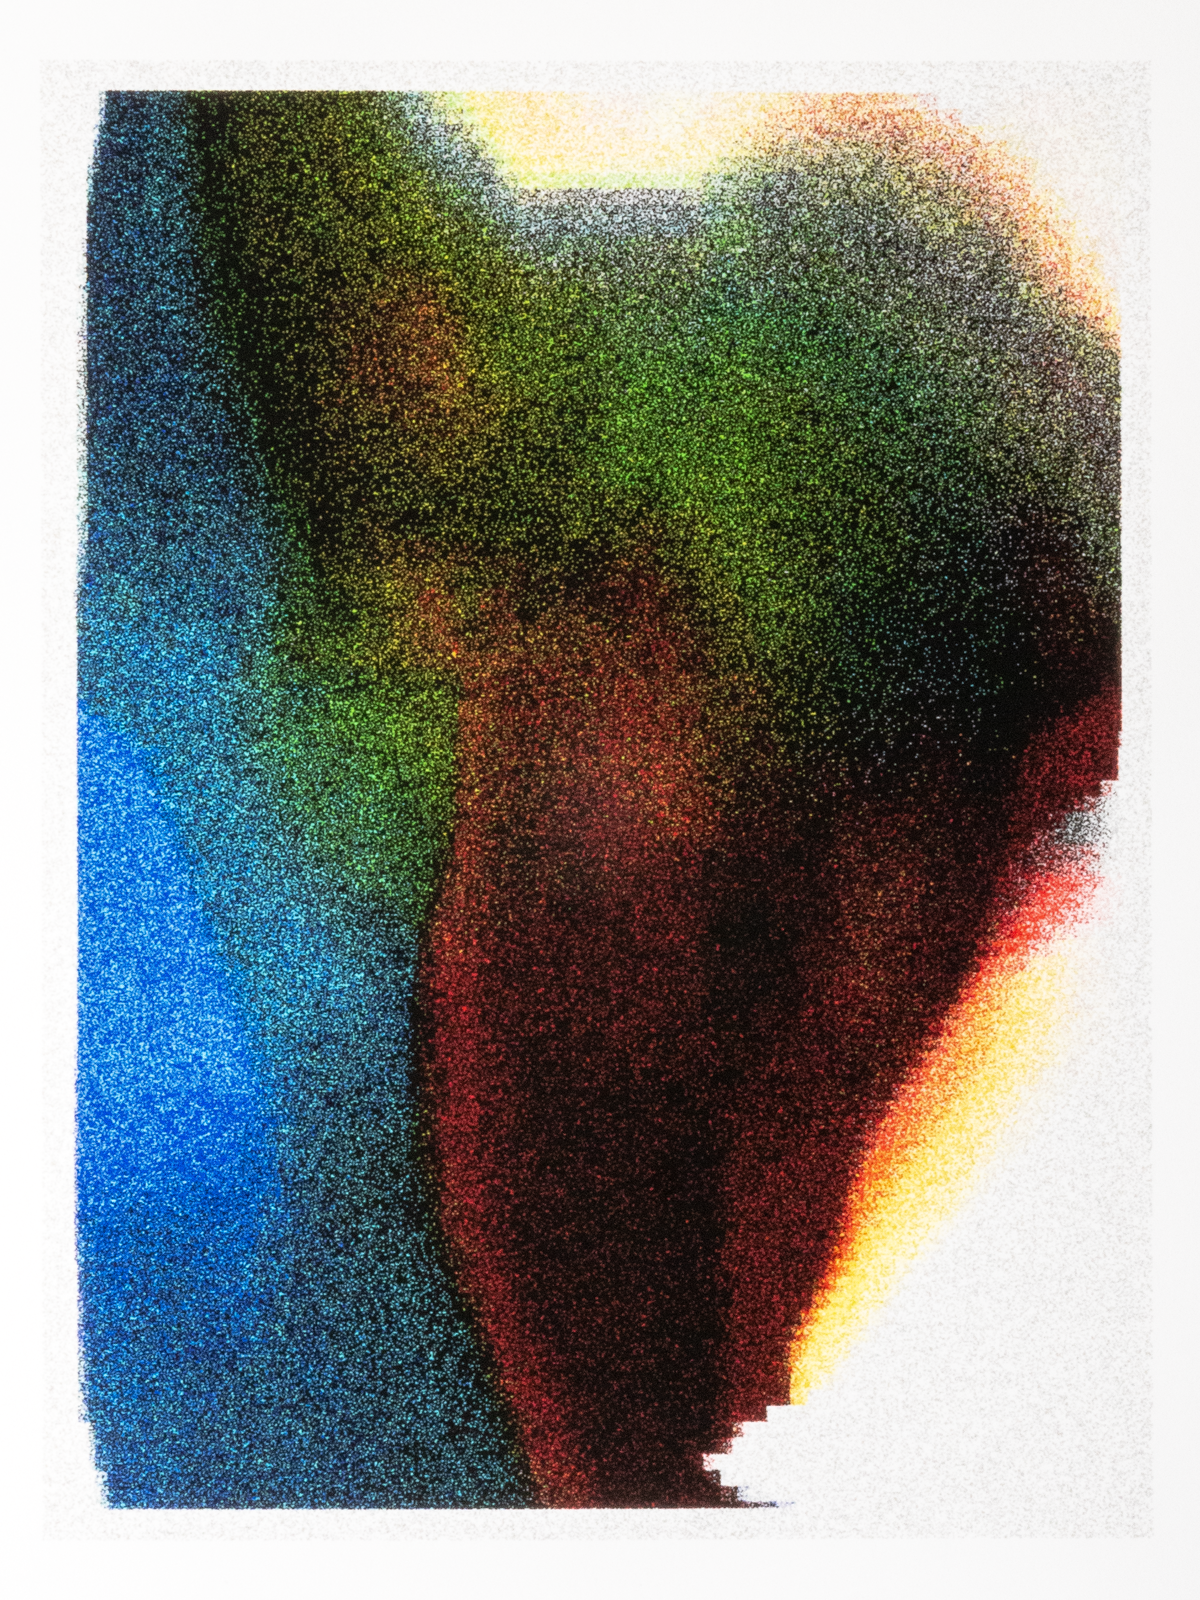 Digital artwork made with custom software. Out-of-band test output from the RASTER series.